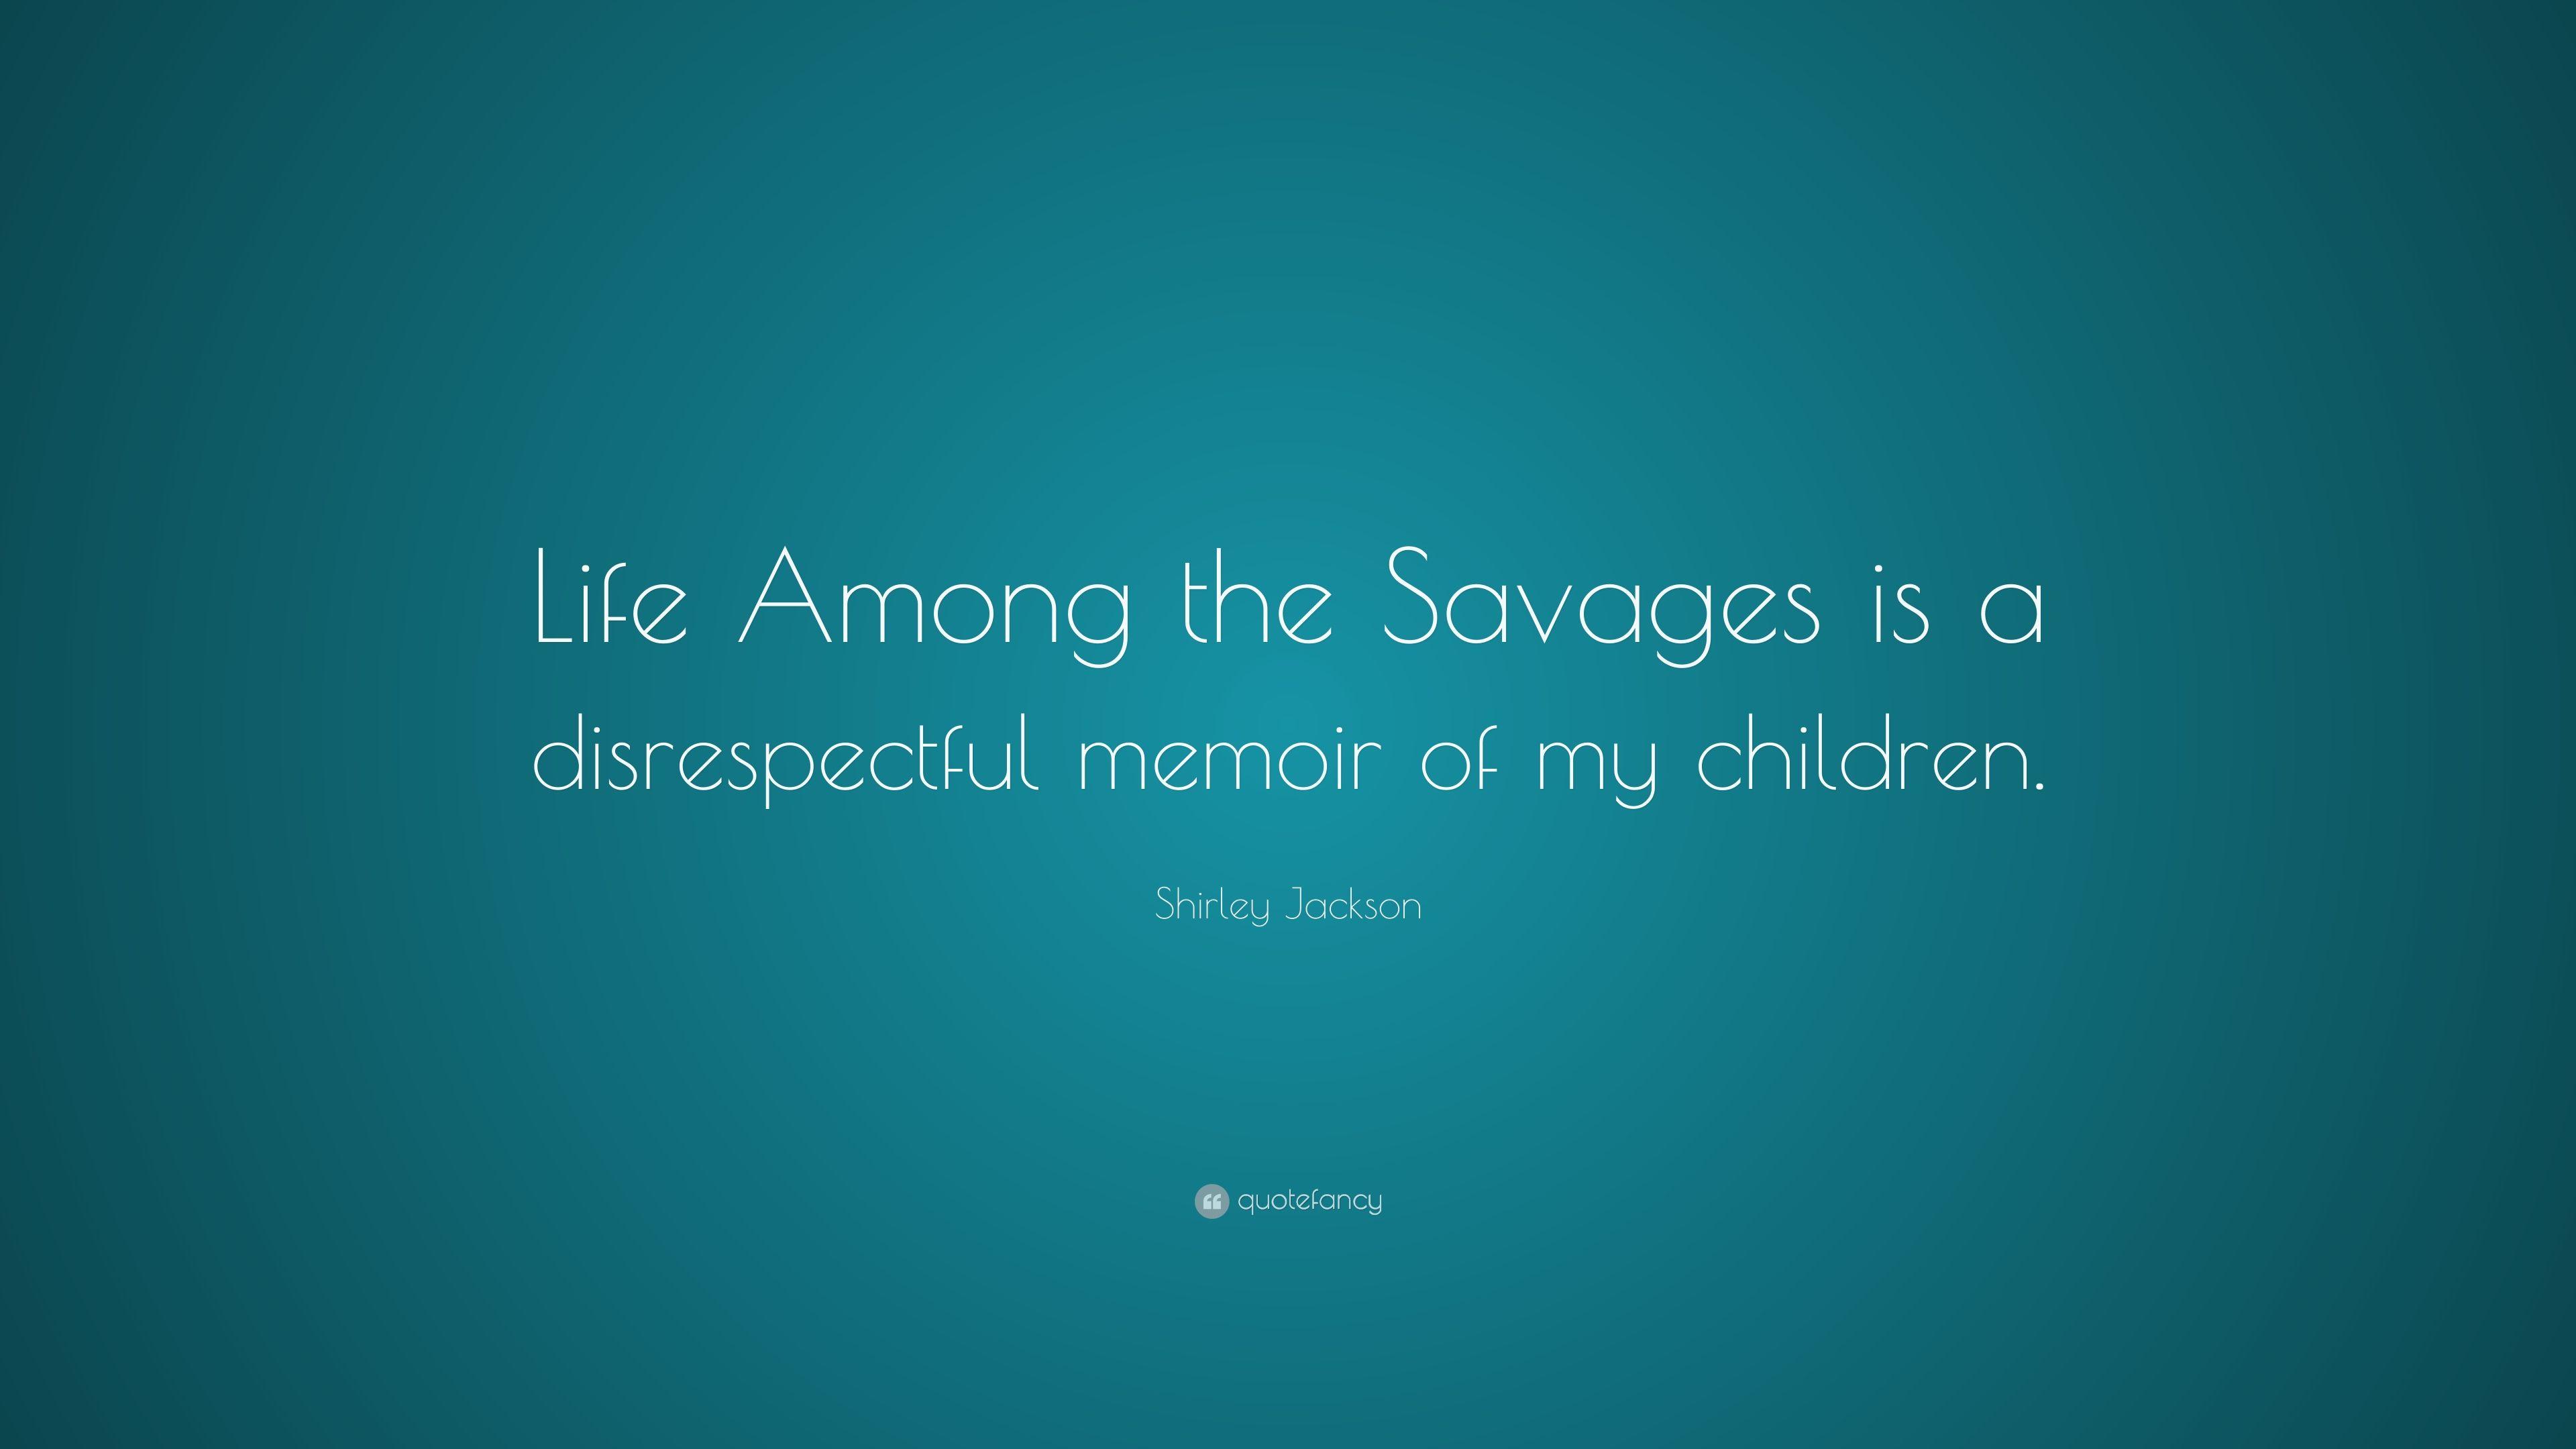 Shirley Jackson Quote: “Life Among the Savages is a disrespectful